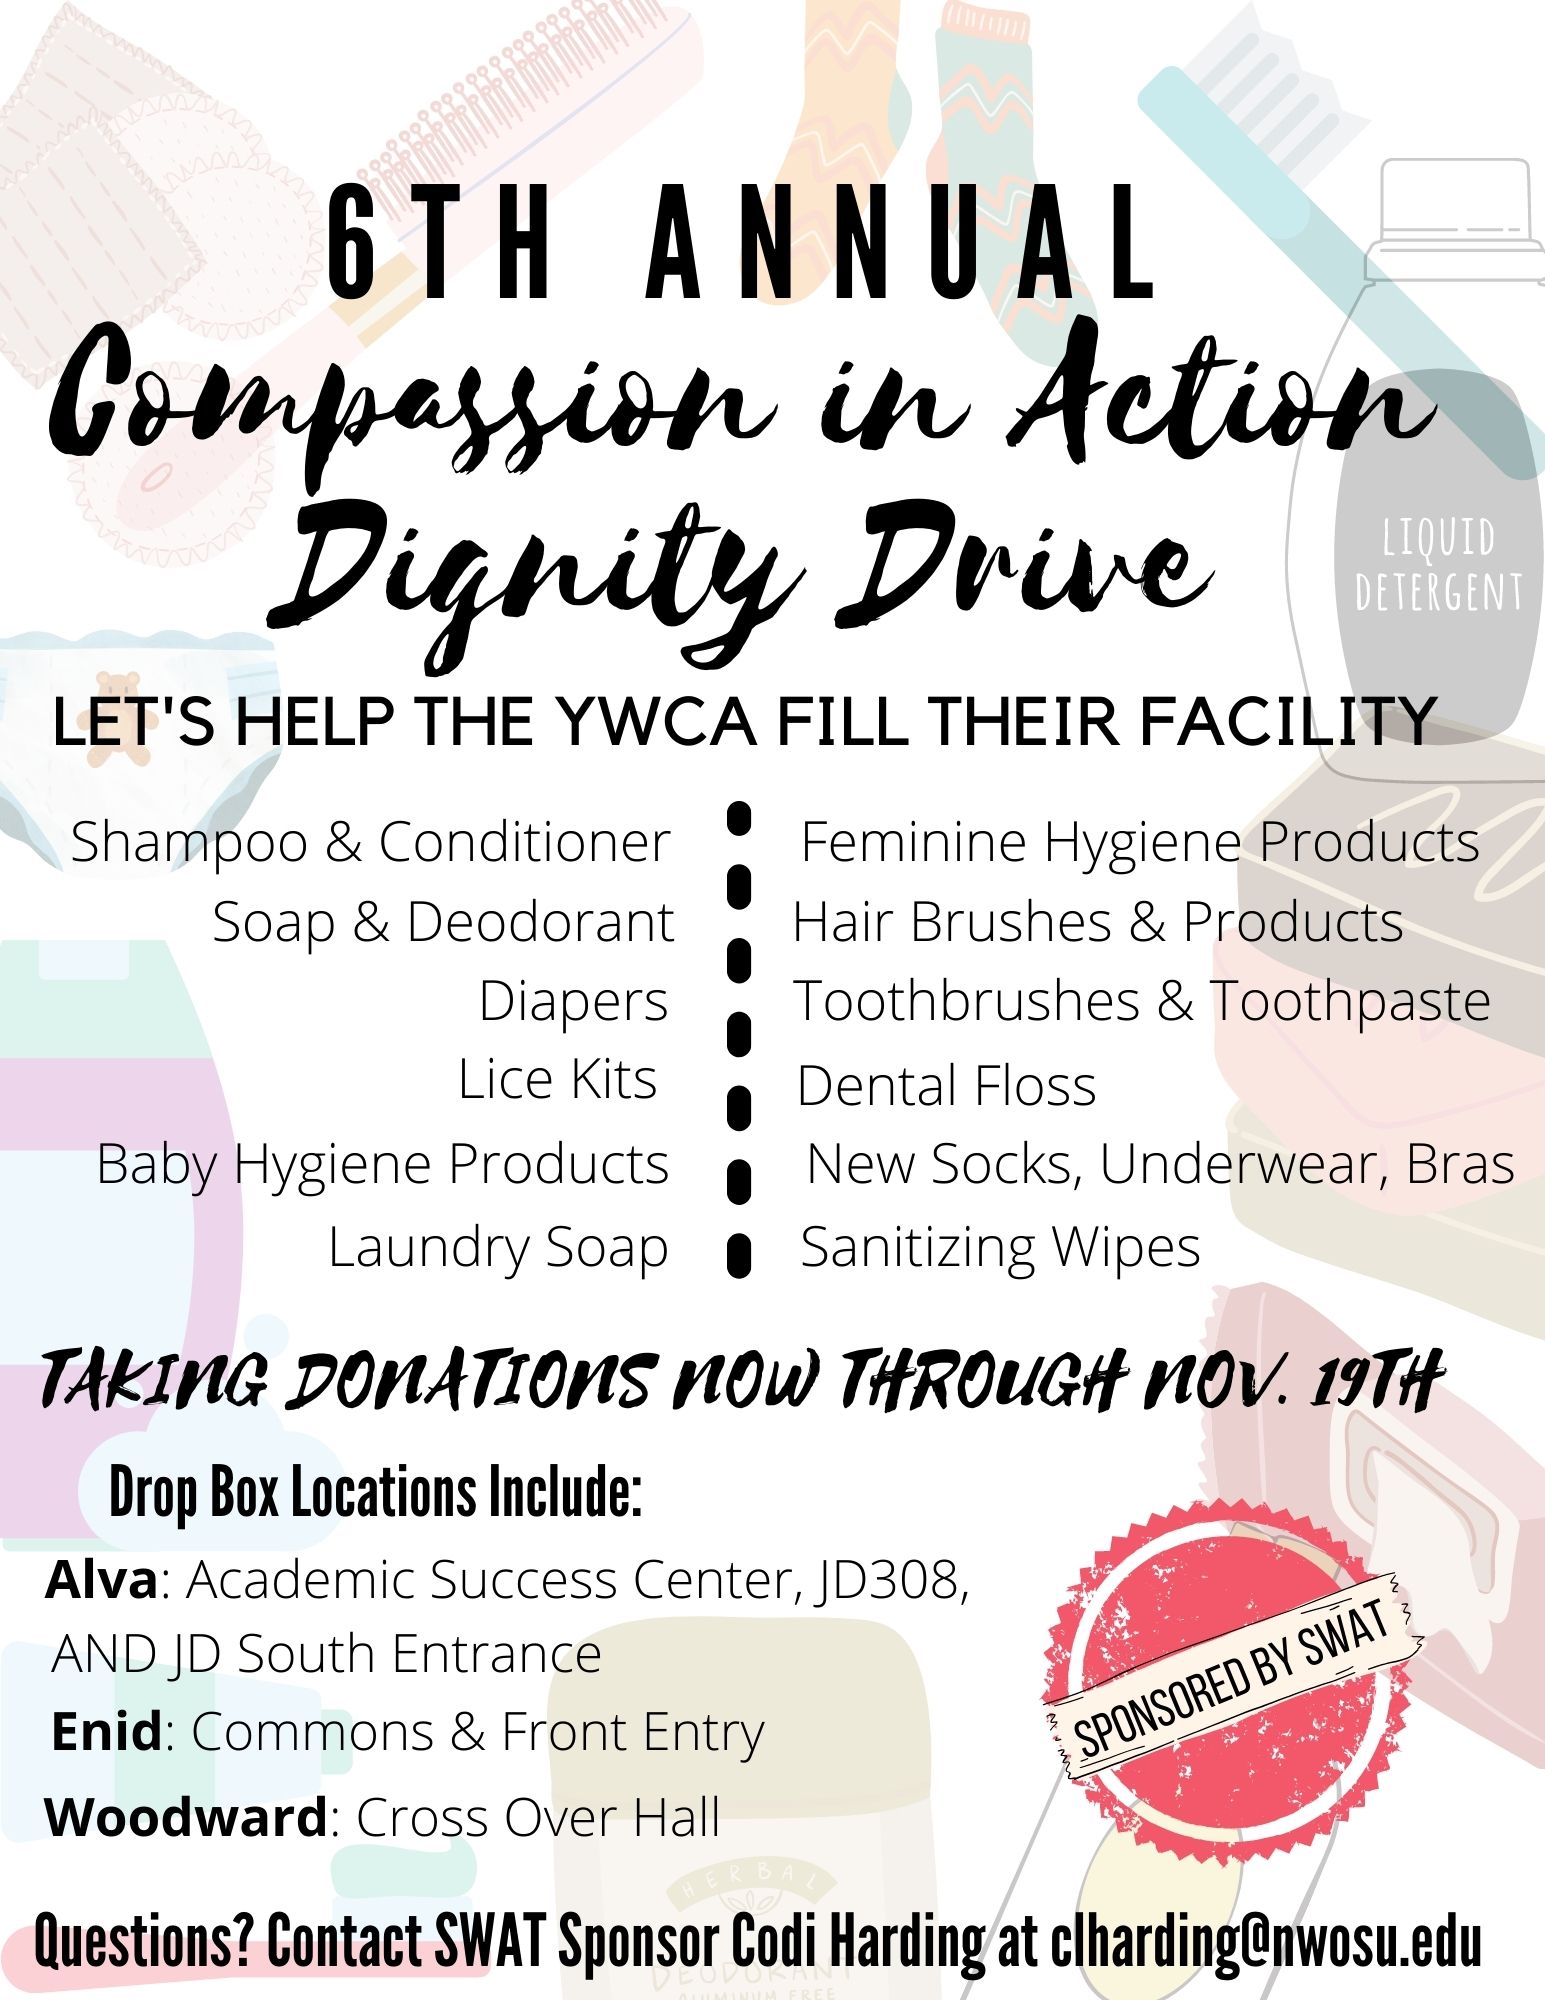 Compassion in Action Dignity Drive 2021 Flyer